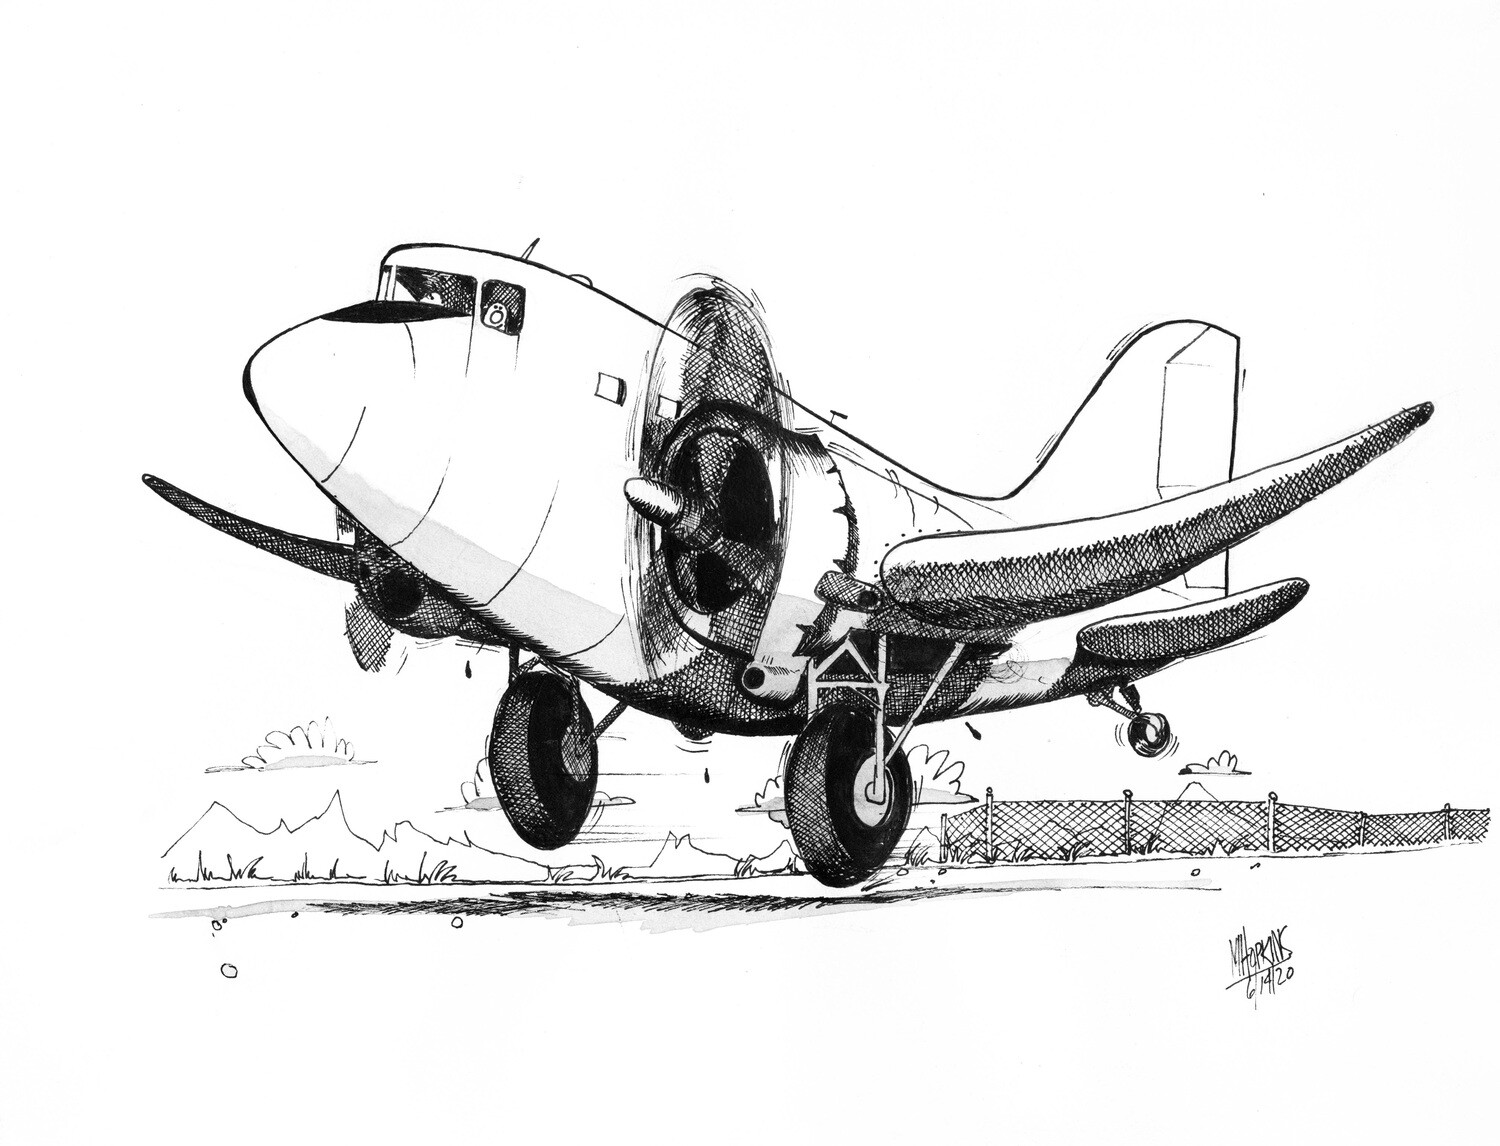 Douglas DC-3 - Limited Edition Signed Giclée Prints from $75 to $100